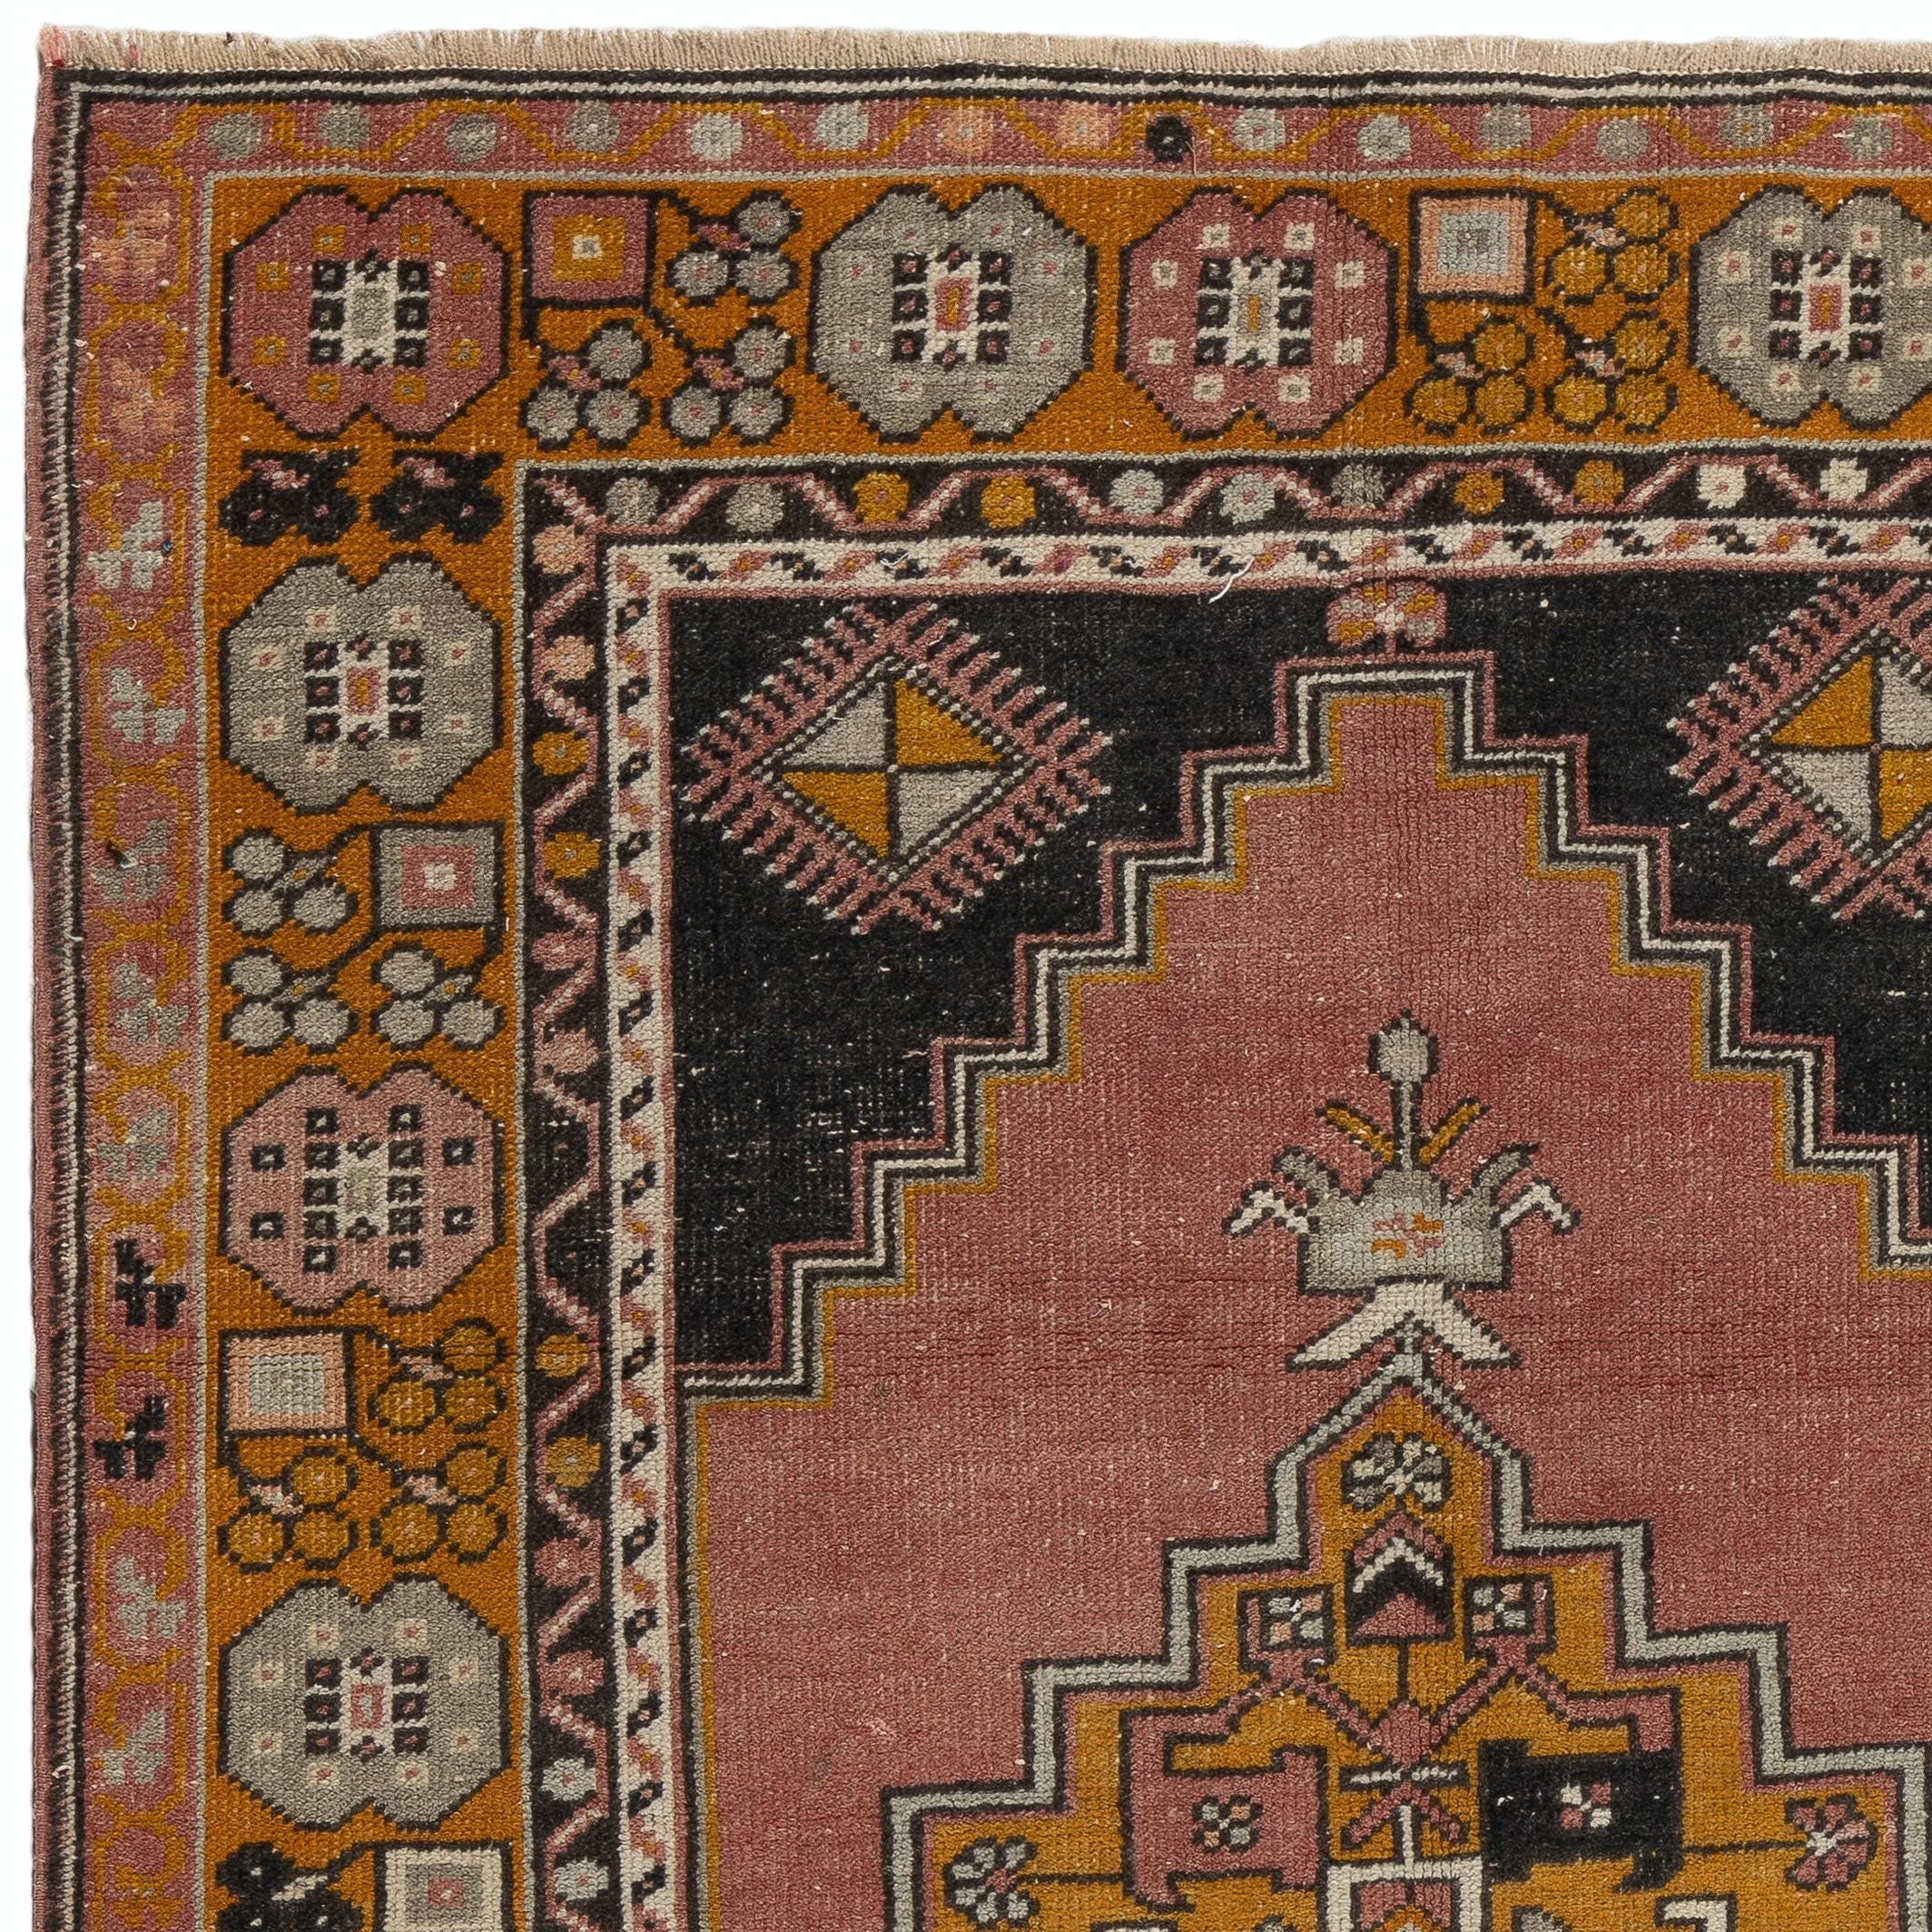 A vintage village rug from Turkey. It is made of medium wool pile on wool foundation and features two linked medallions and geometric corner pieces and a large main border in pale red/faded coral, gold and dark navy colors. Measures: 4 x 7 ft
It has